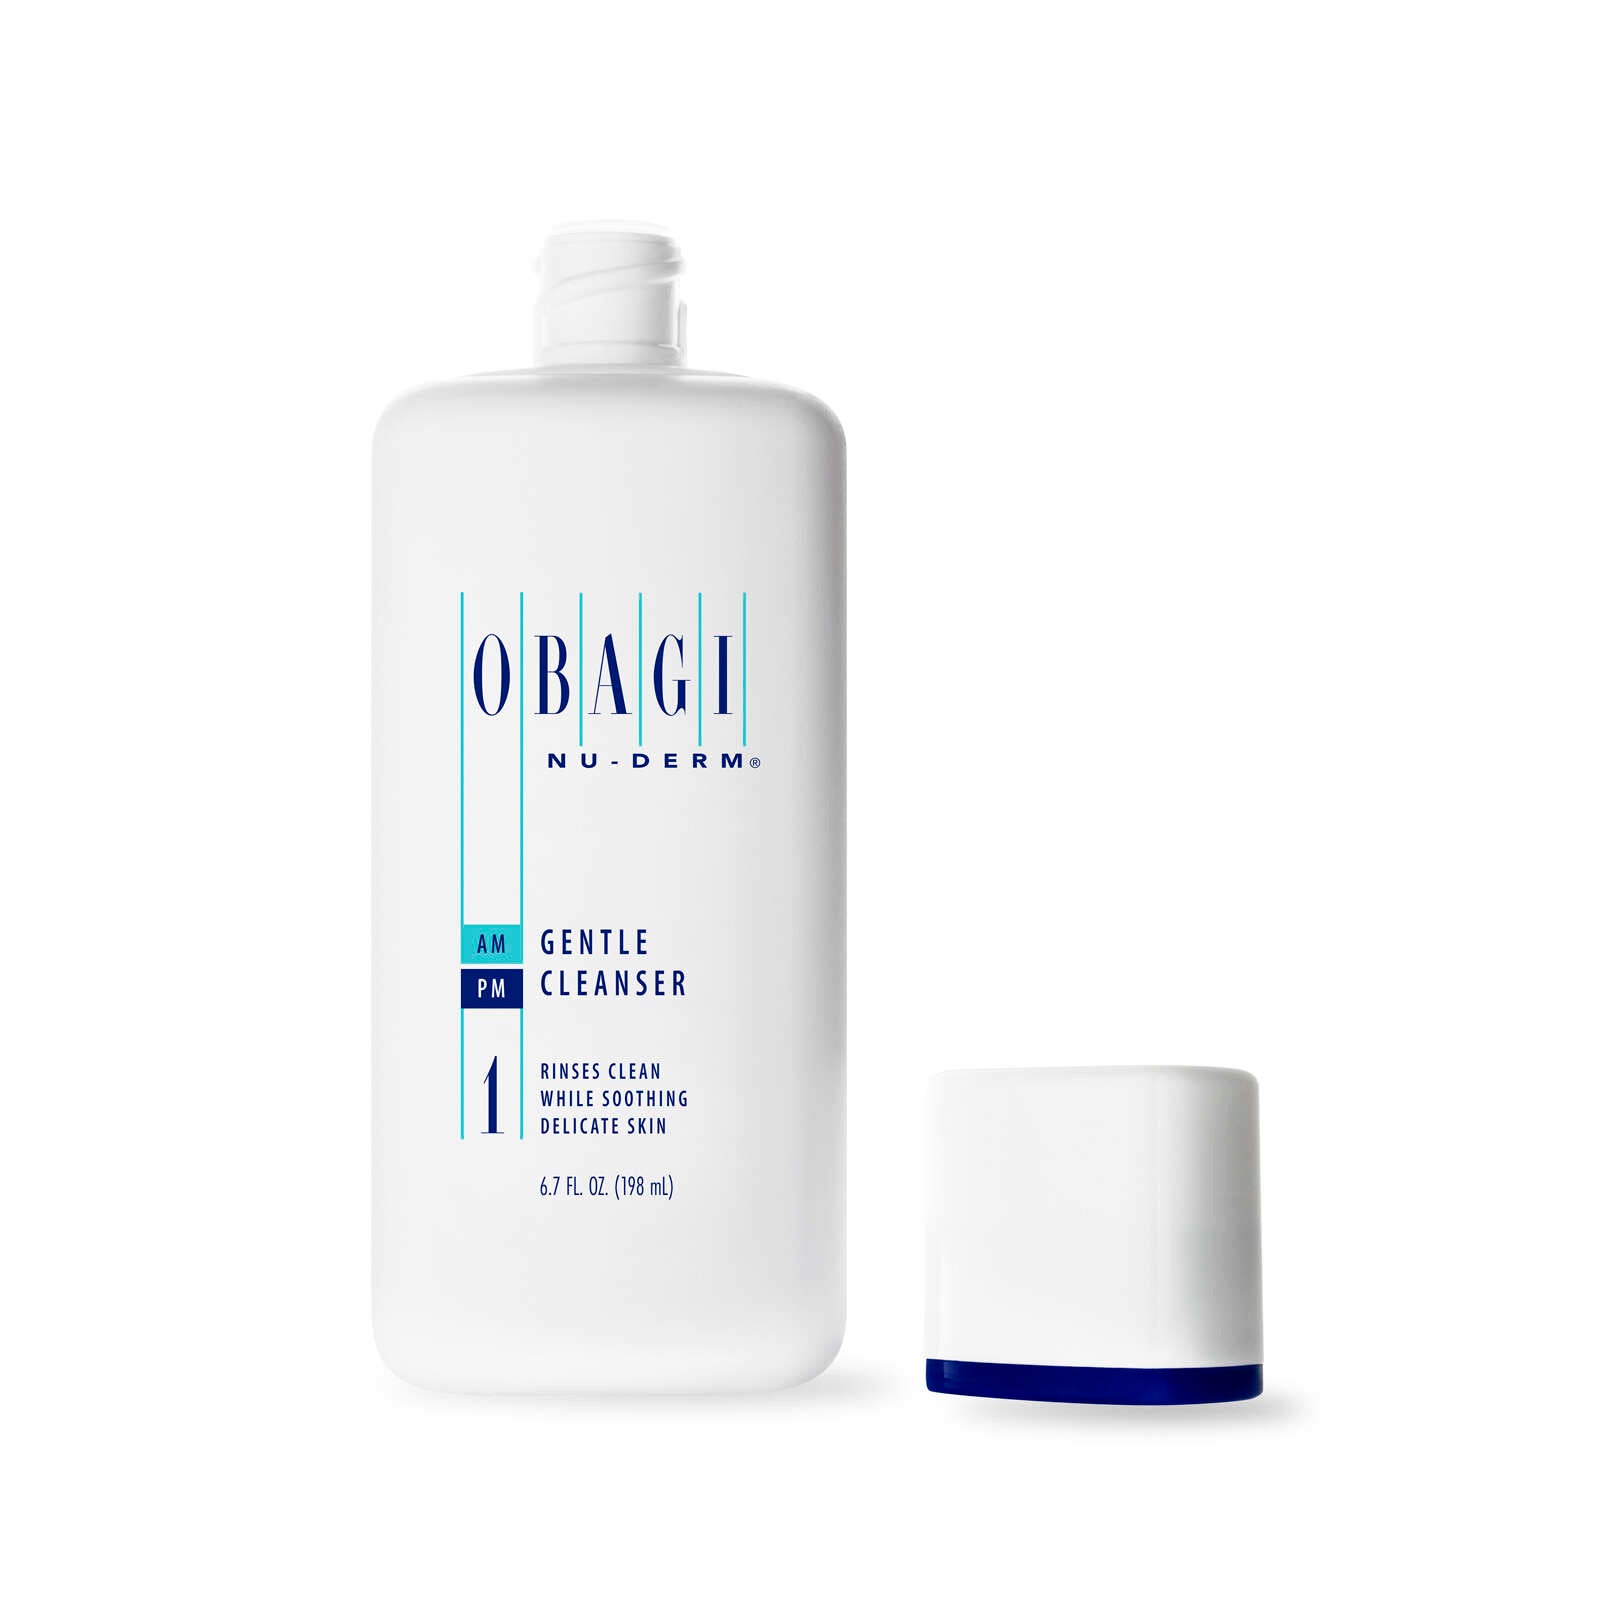 Obagi Nu-Derm Gentle Cleanser from MyExceptionalSkinCare.com Bottle and Cap